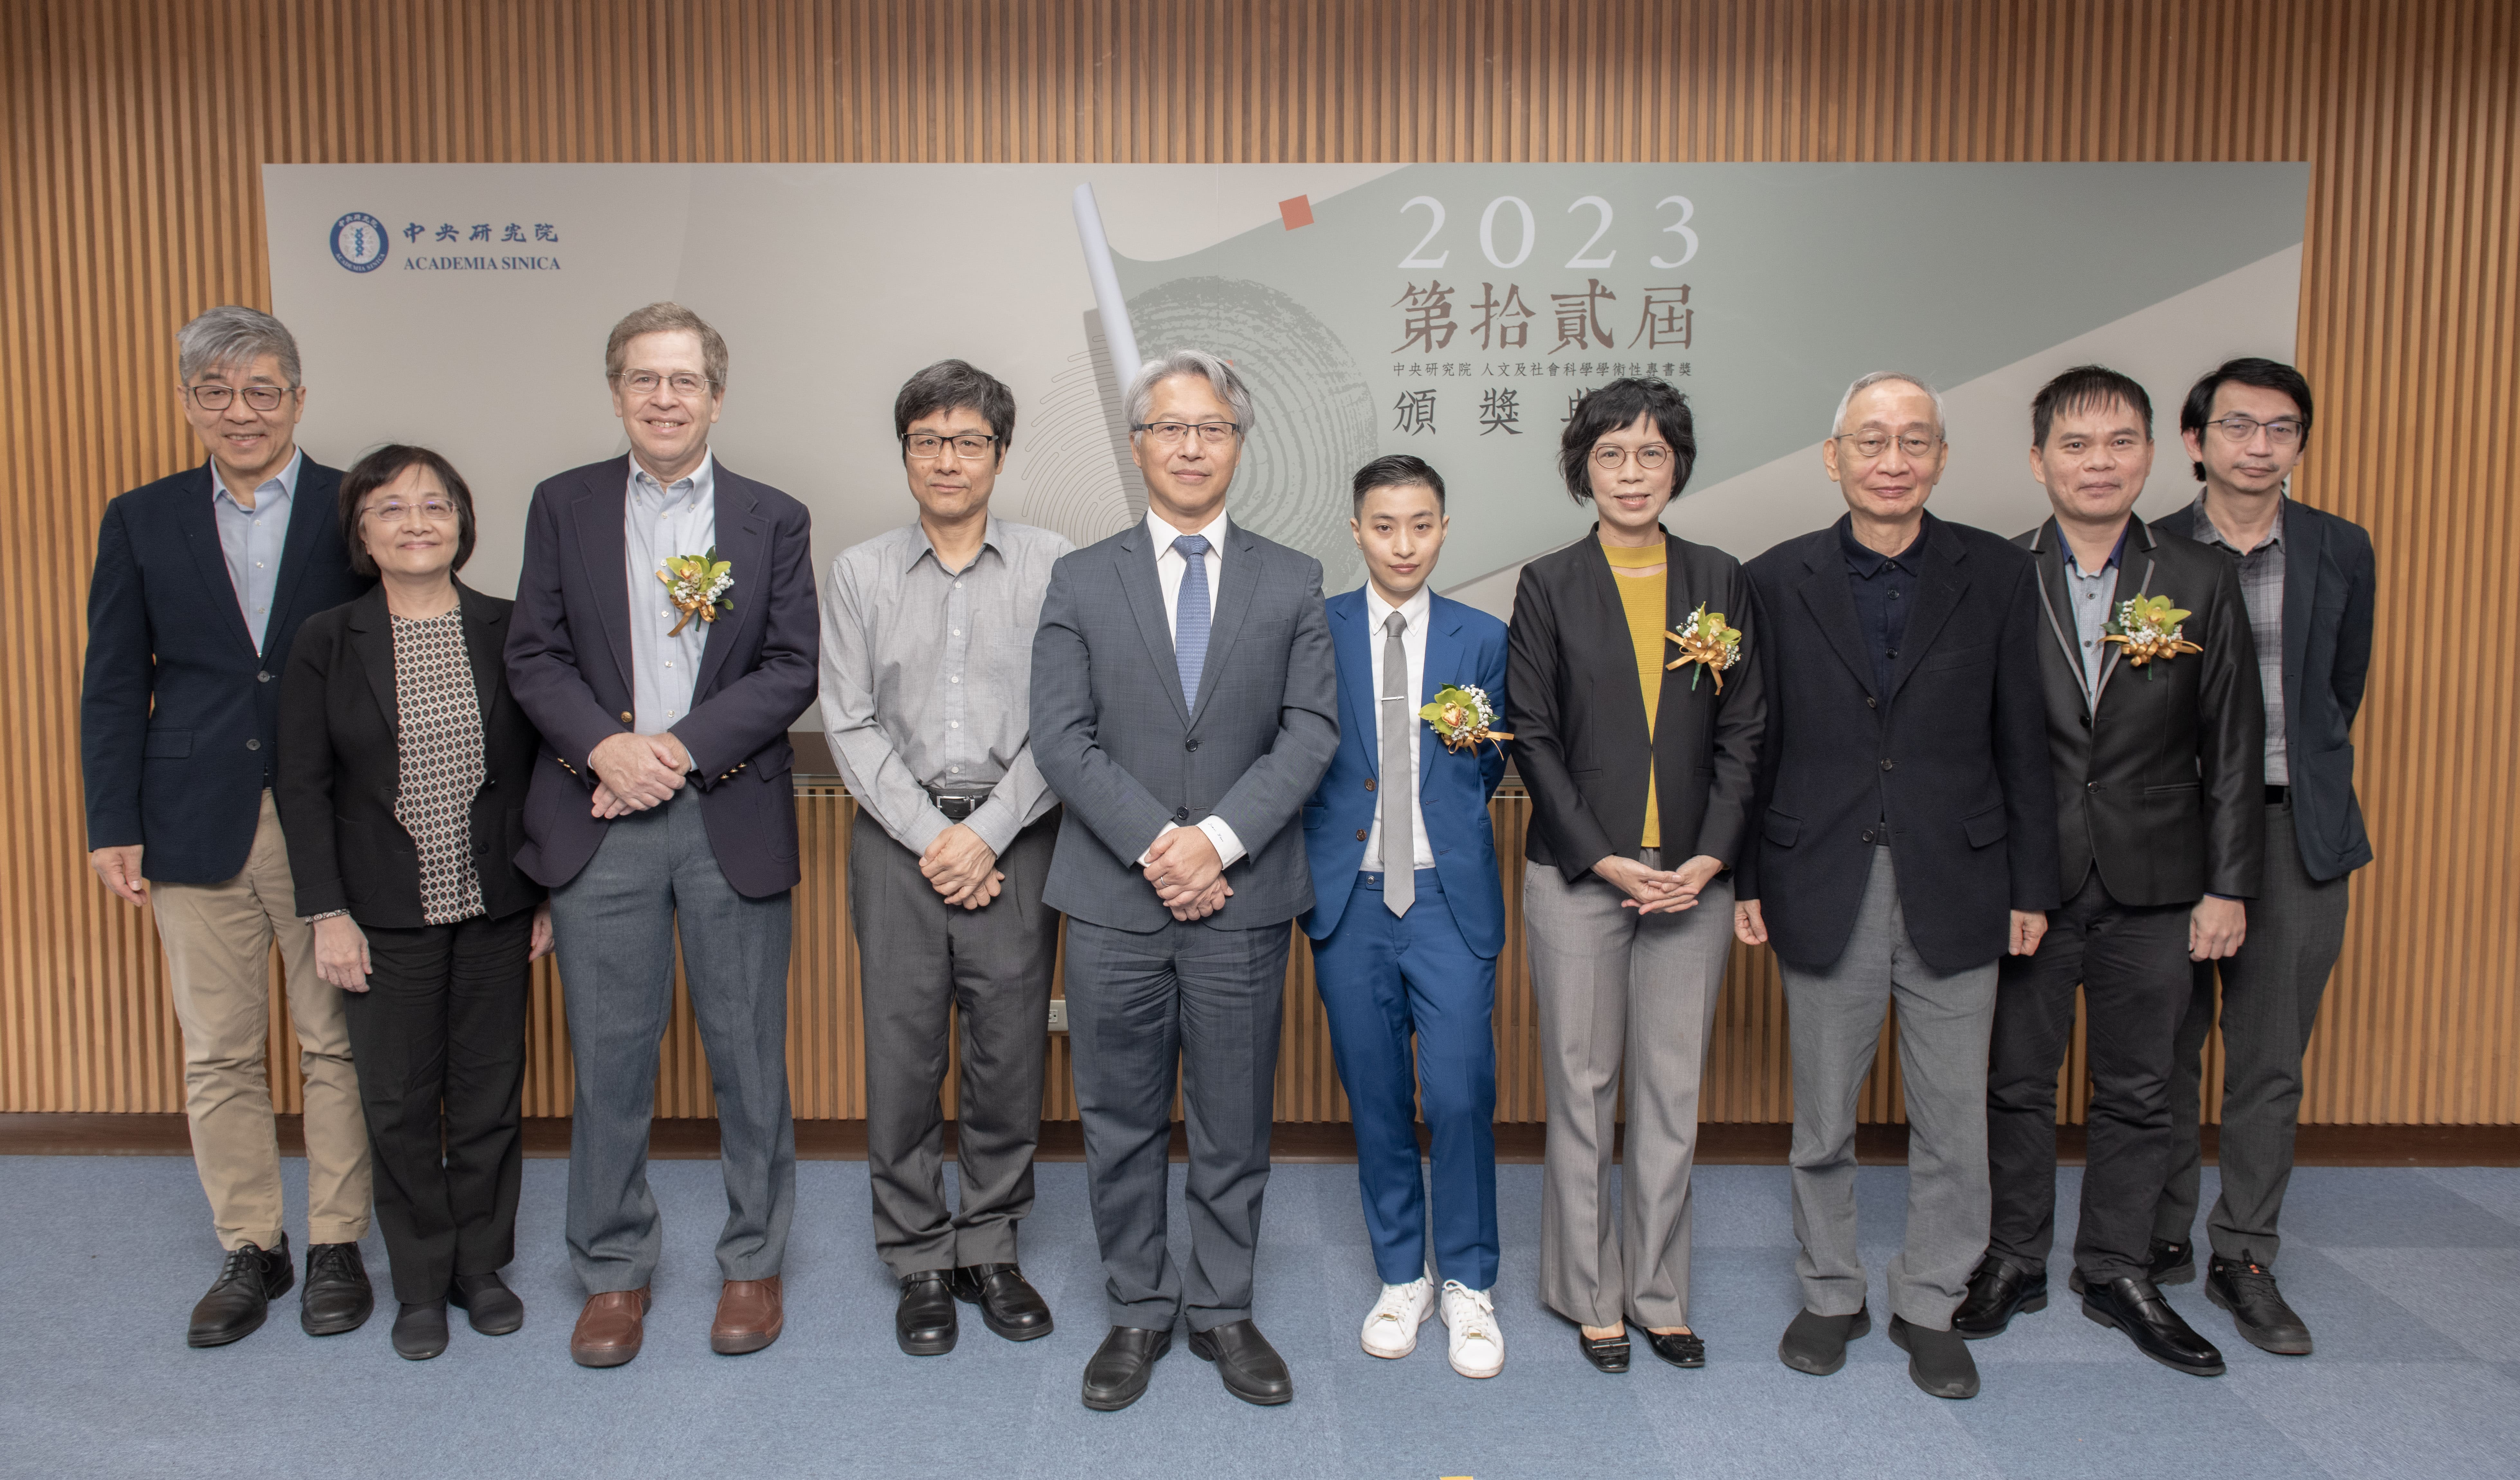 【Press Releases】The 12th Academia Sinica Scholarly Monograph Award Awarded to the Authors of Five Books